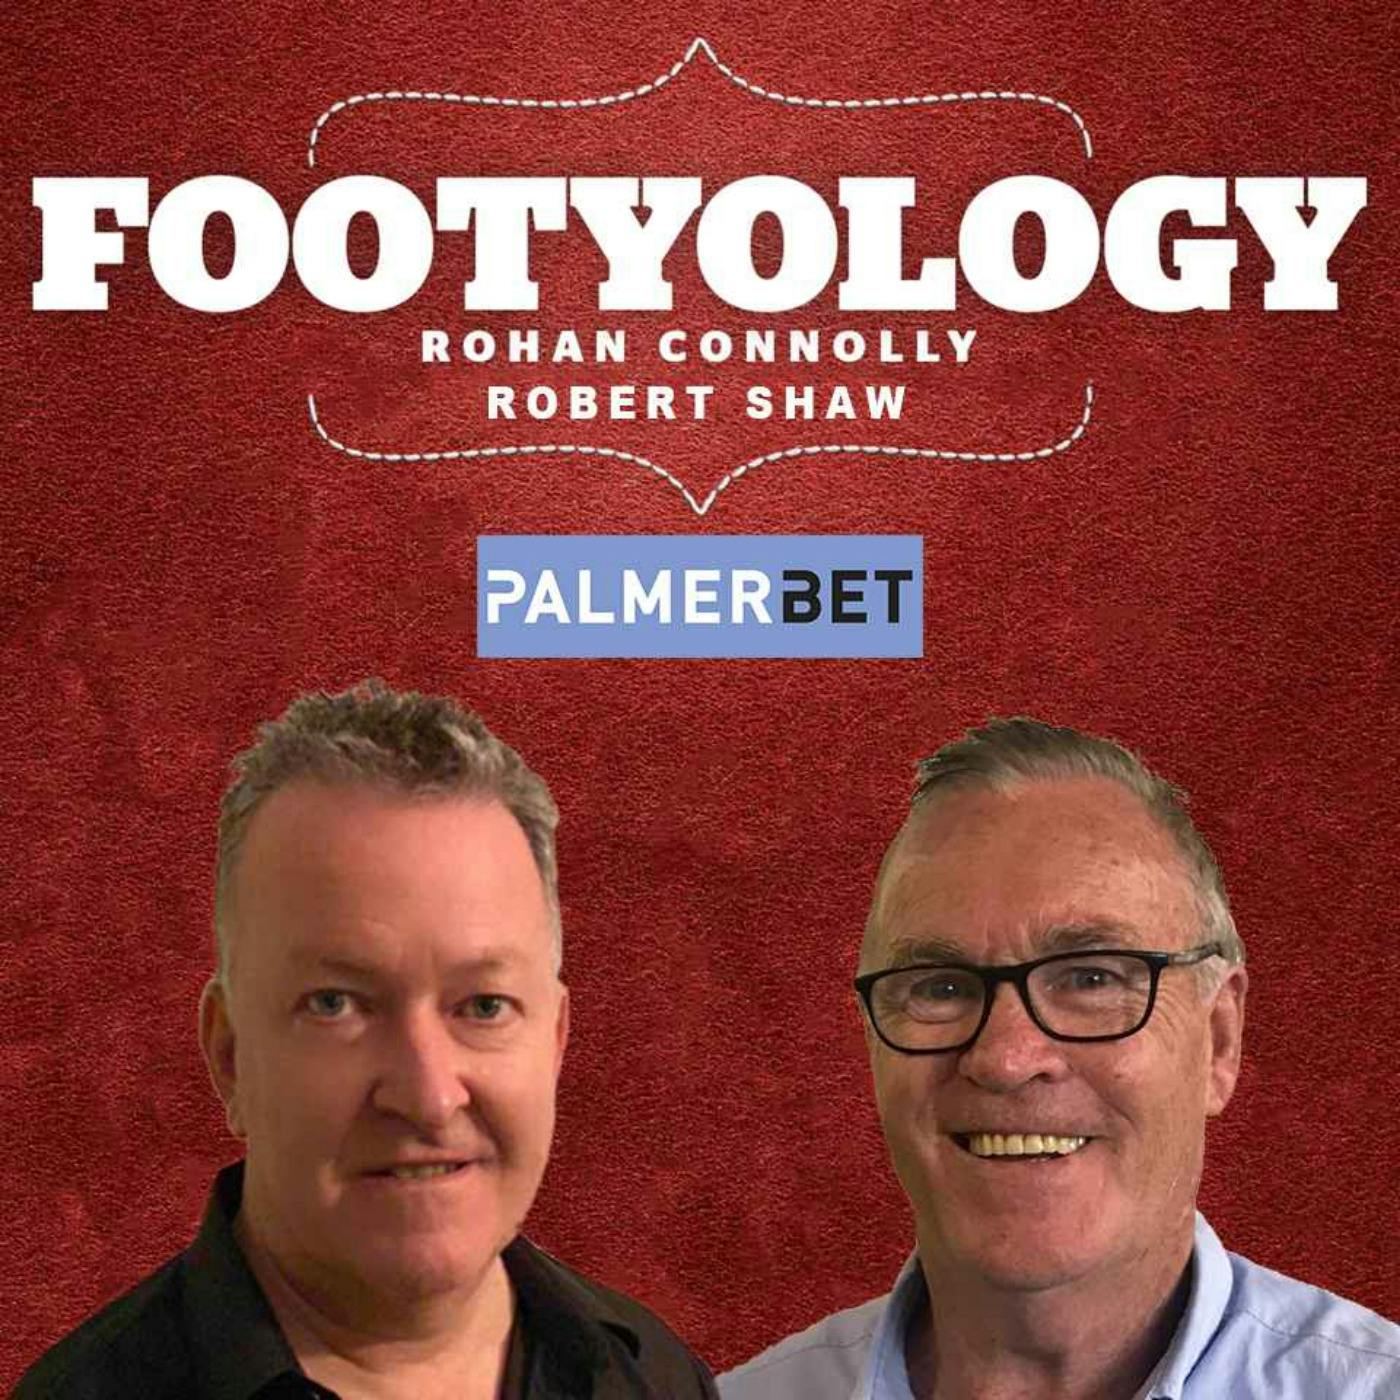 Footyology Podcast - June 26th 2022